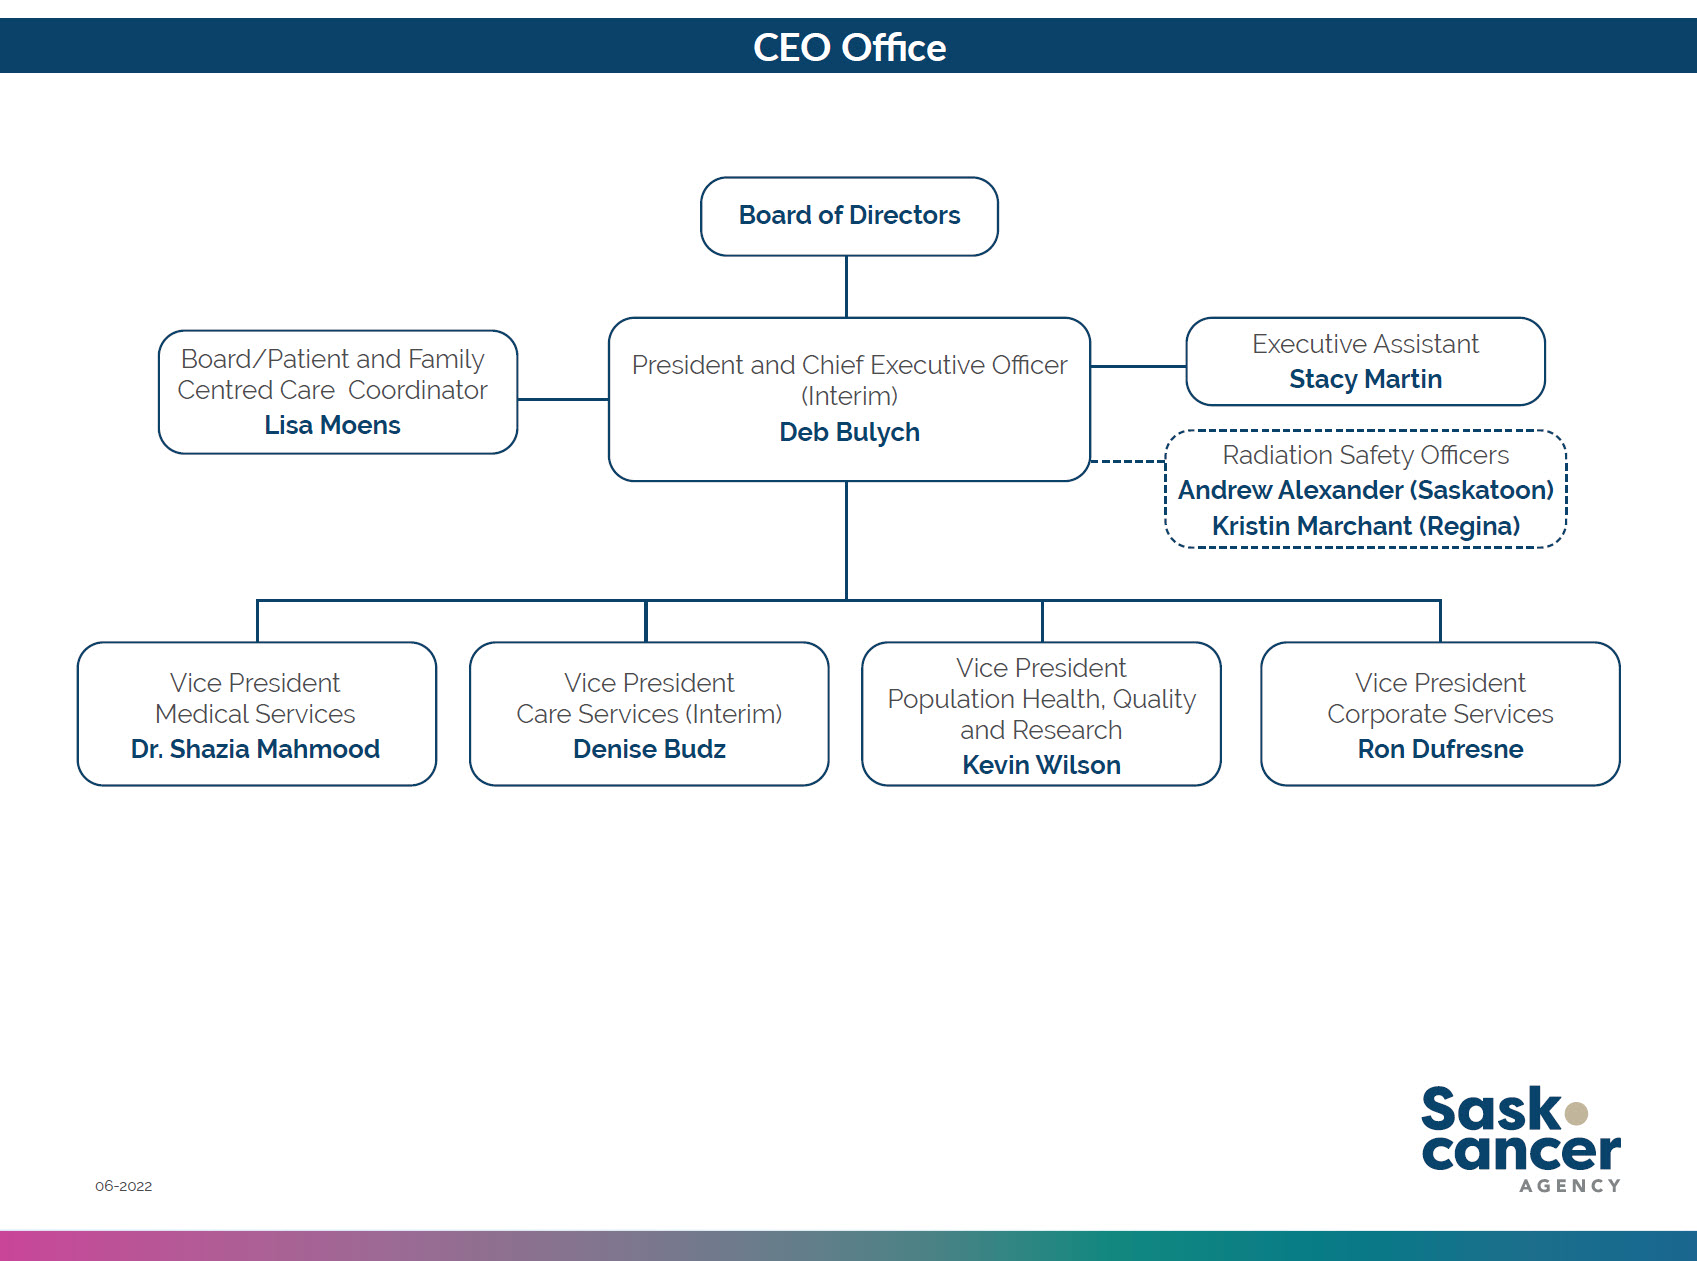 Org Chart CEO Office 06 2022